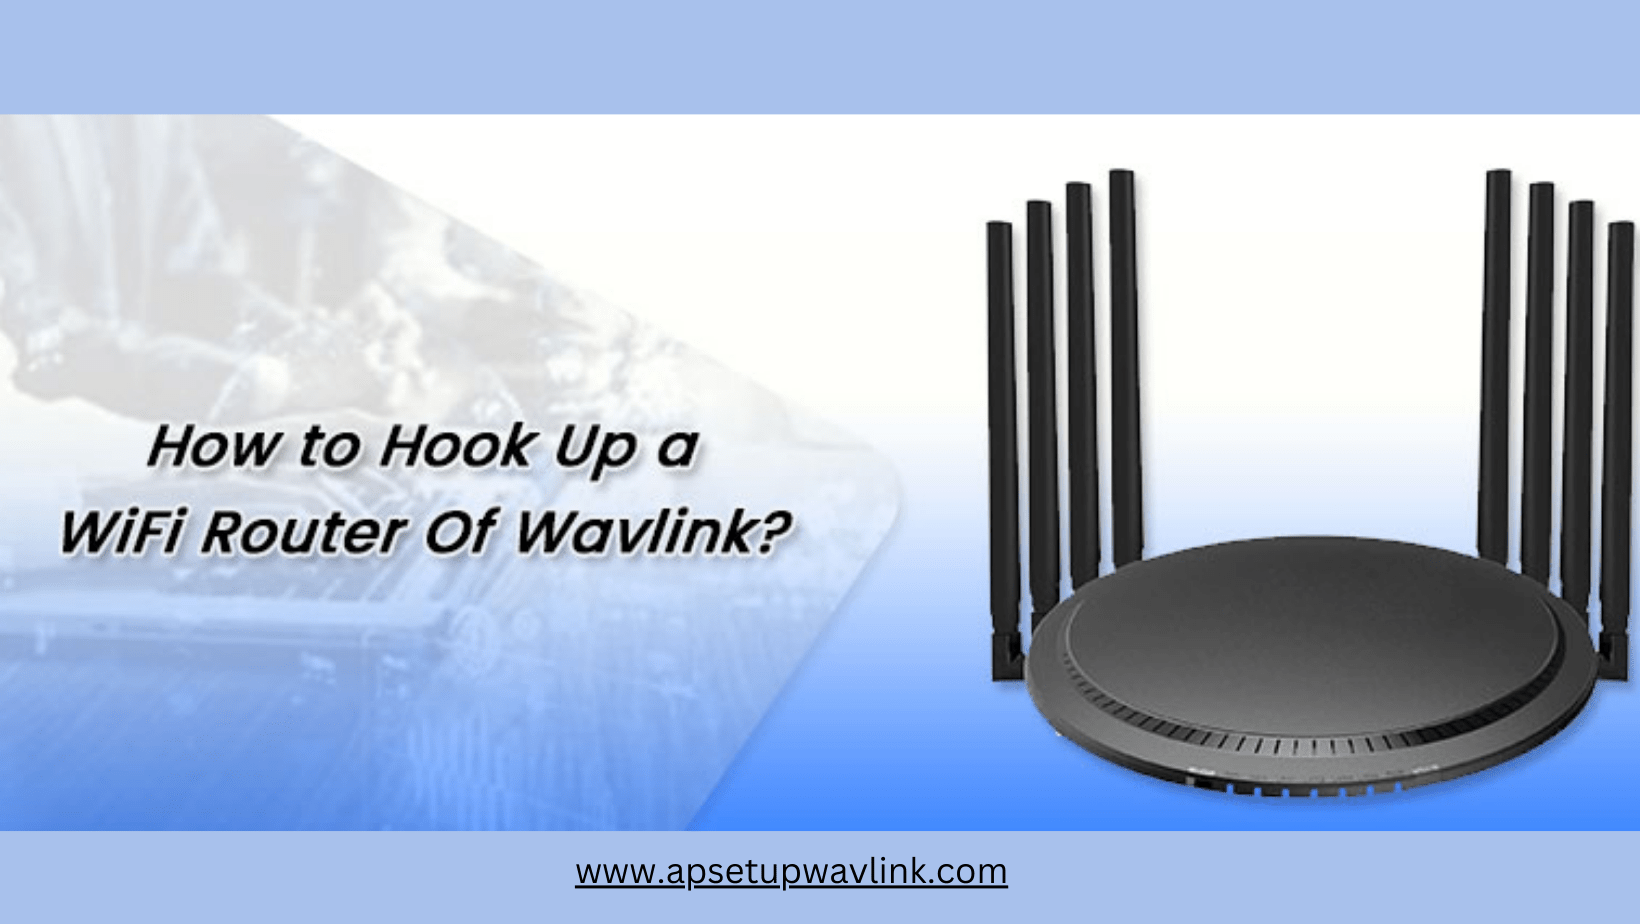 You are currently viewing Instructions for Setting Up a Wavlink WiFi Router